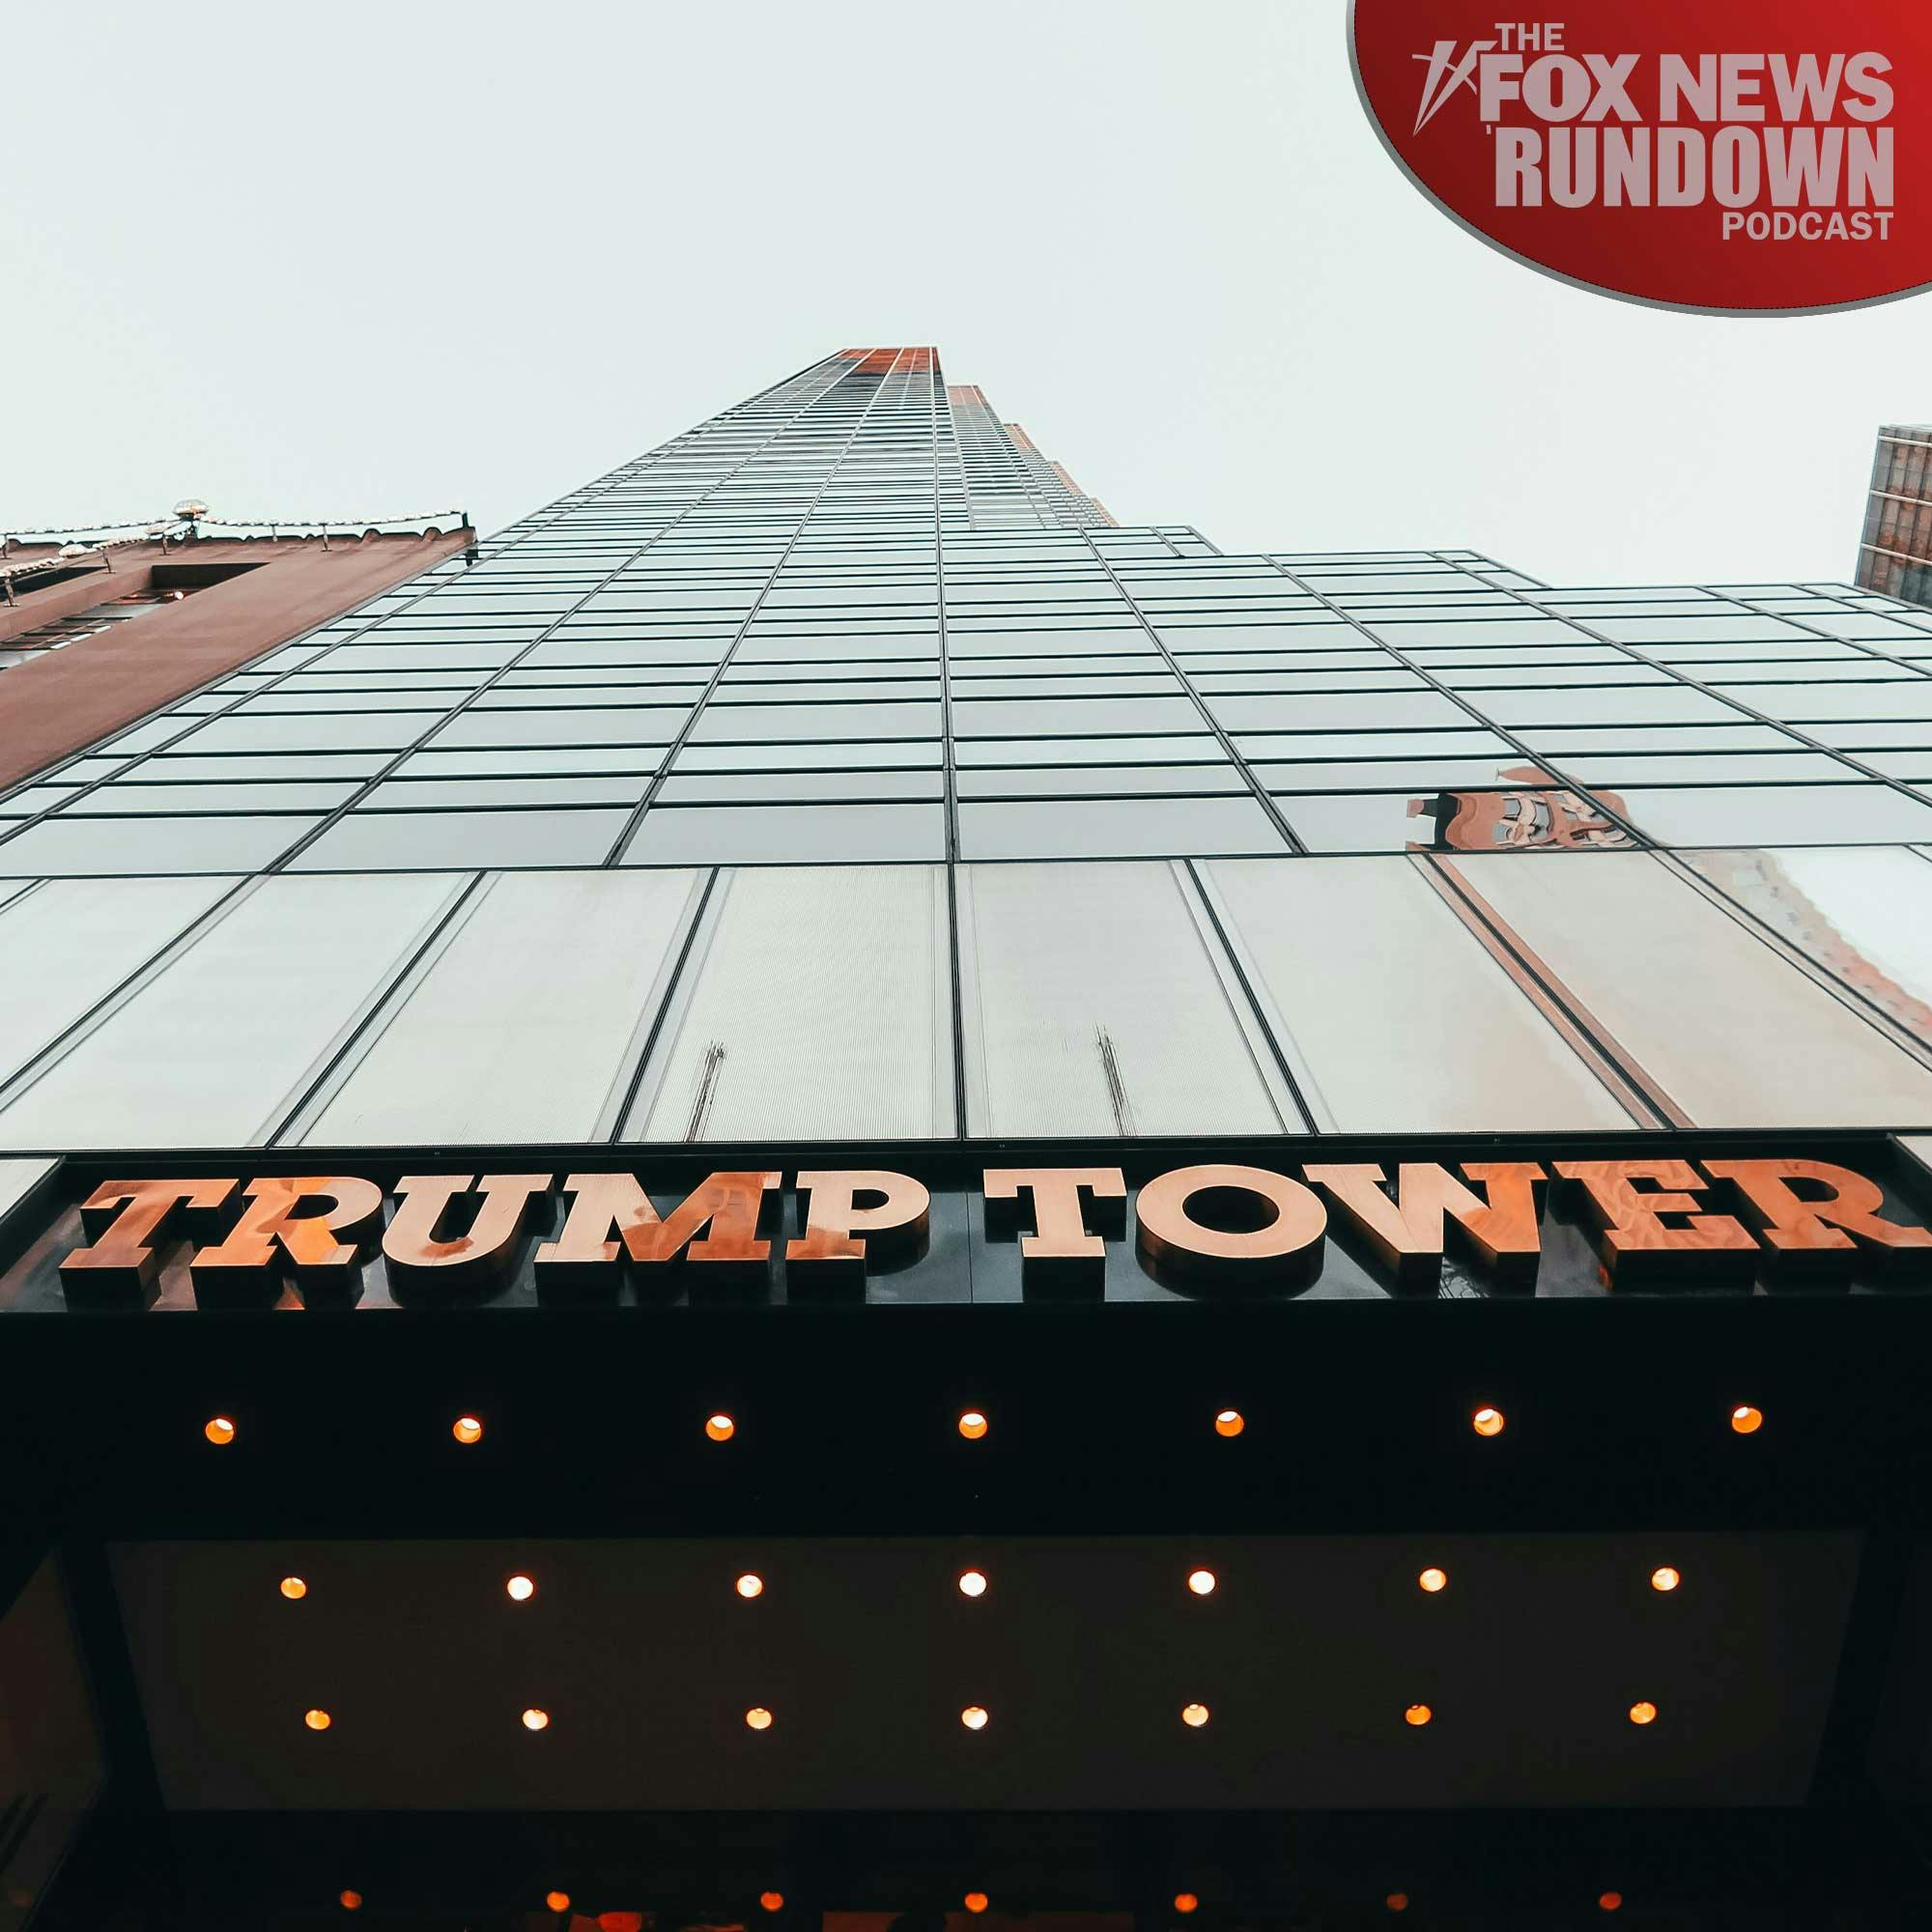 The Trouble Surrounding Trump Tower